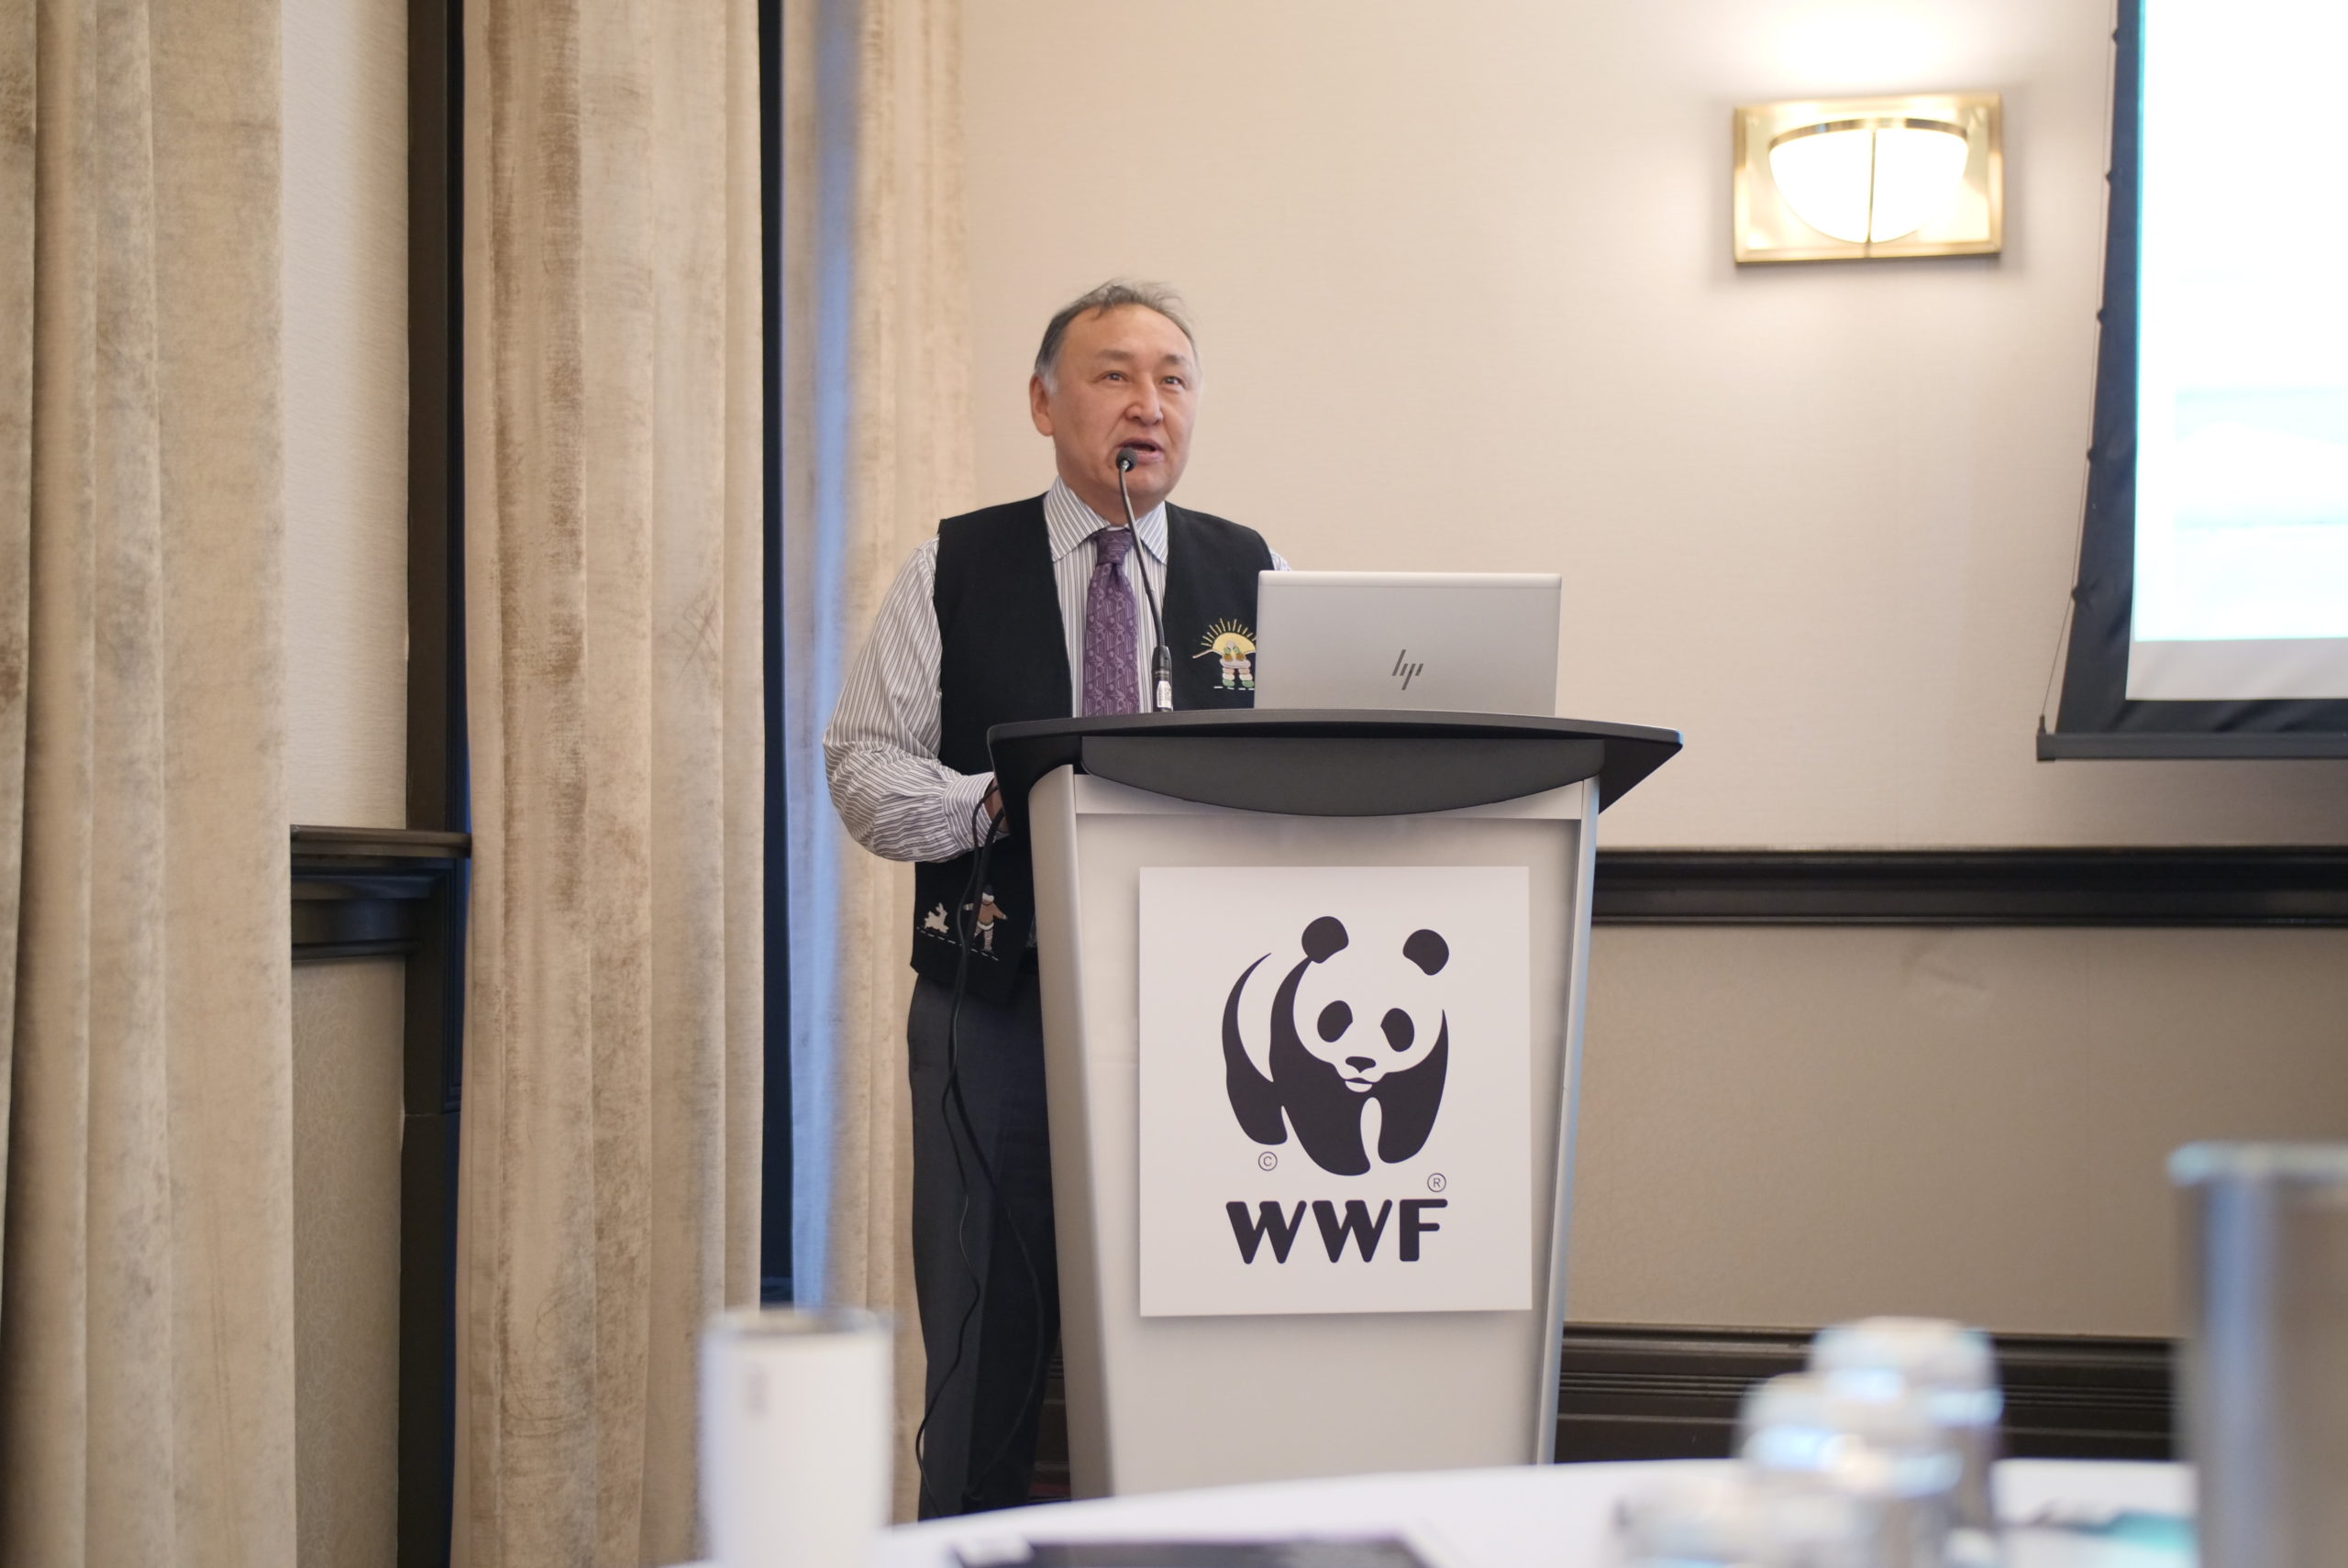 Inuit man standing behind a podium with a WWF panda logo on it